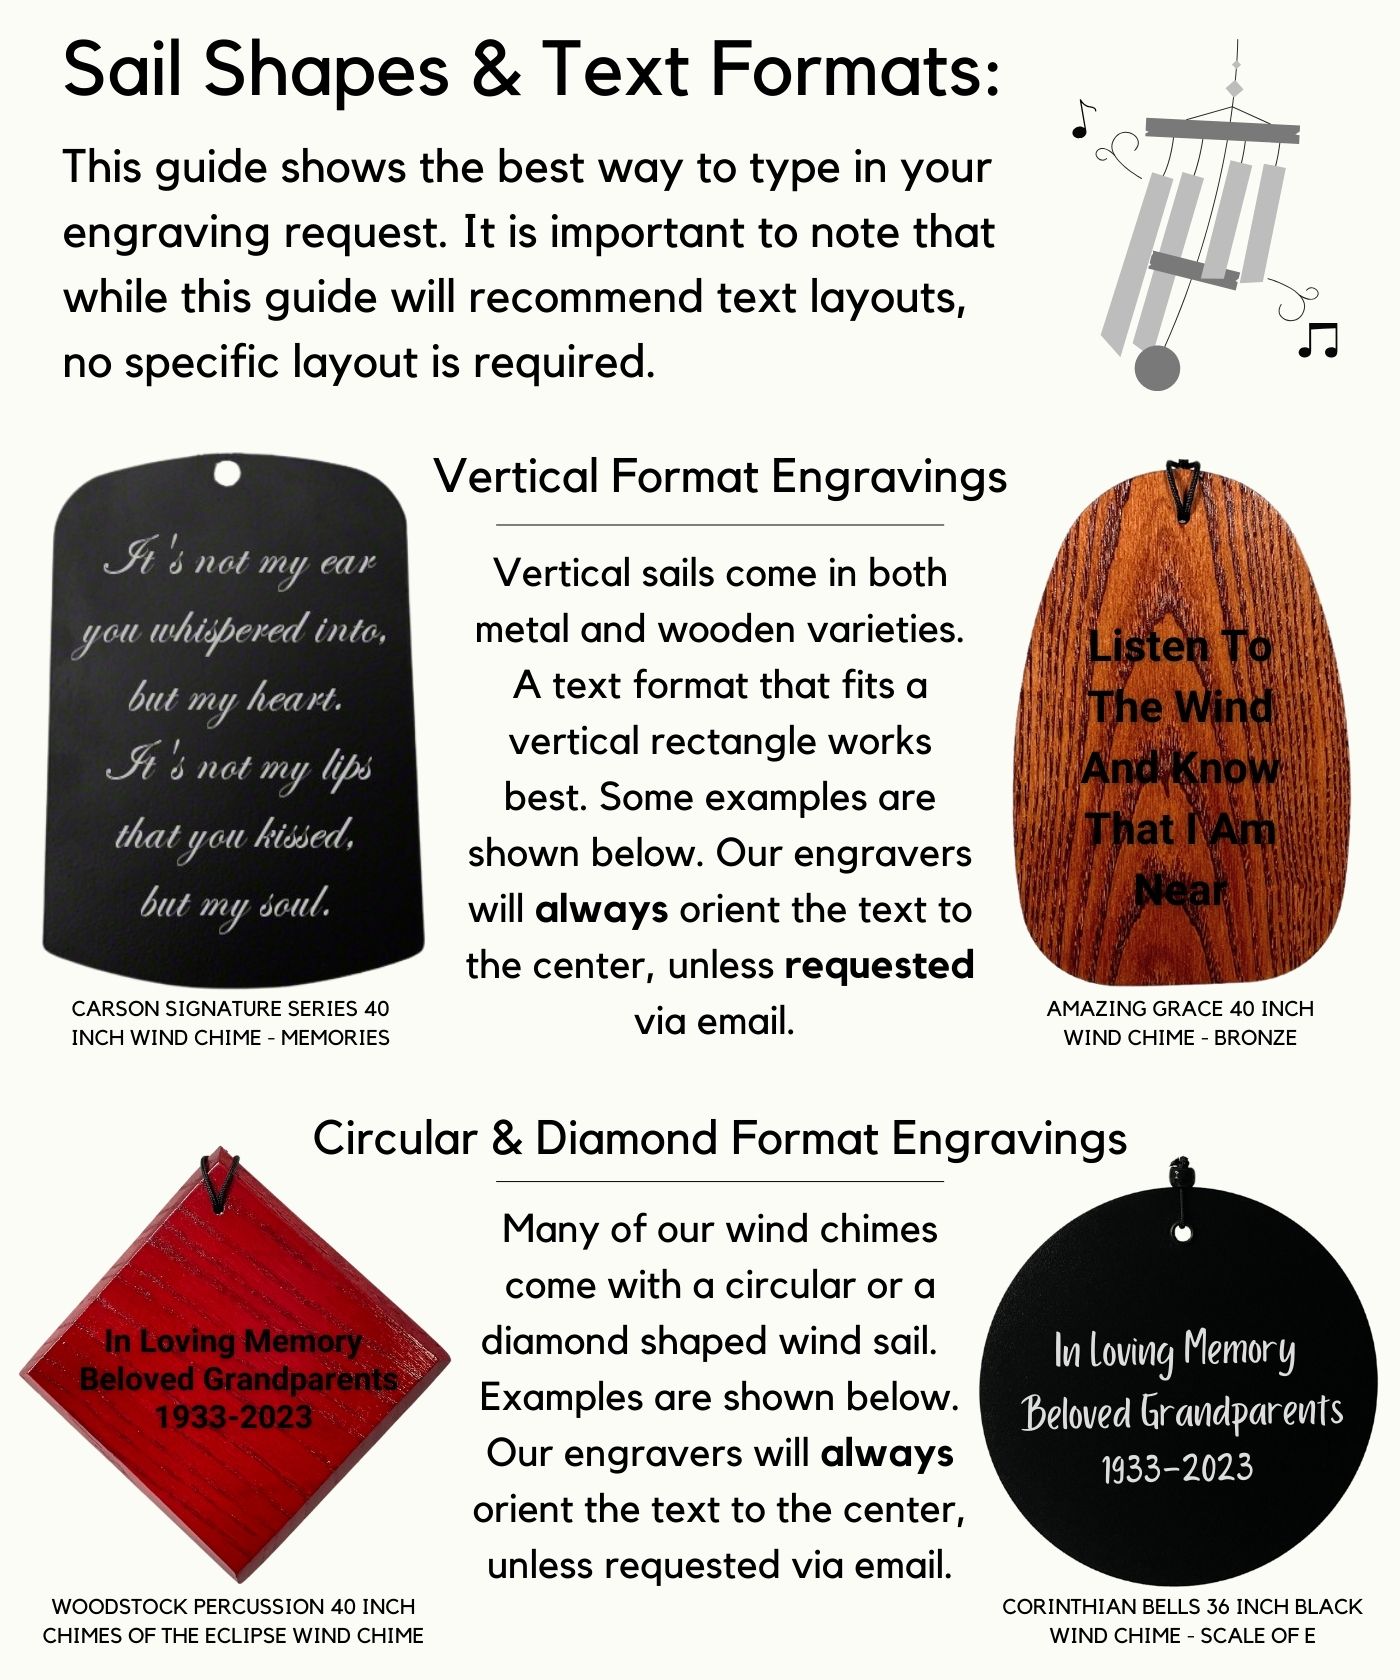 Sail Shapes & Text Formats: This guide shows the best way to type in your engraving request. It is important to note that while this guide will recommend text layouts, no specific layout is required. Vertical Format Engravings Vertical sails come in both metal and wooden varieties. A text format that fits a vertical rectangle works best. Some examples are shown below. Our engravers will always orient the text to the center, unless requested via email. Circular & Diamond Format Engravings Many of our wind chimes come with a circular or a diamond shaped wind sail.  Examples are shown below. Our engravers will always orient the text to the center, unless requested via email.